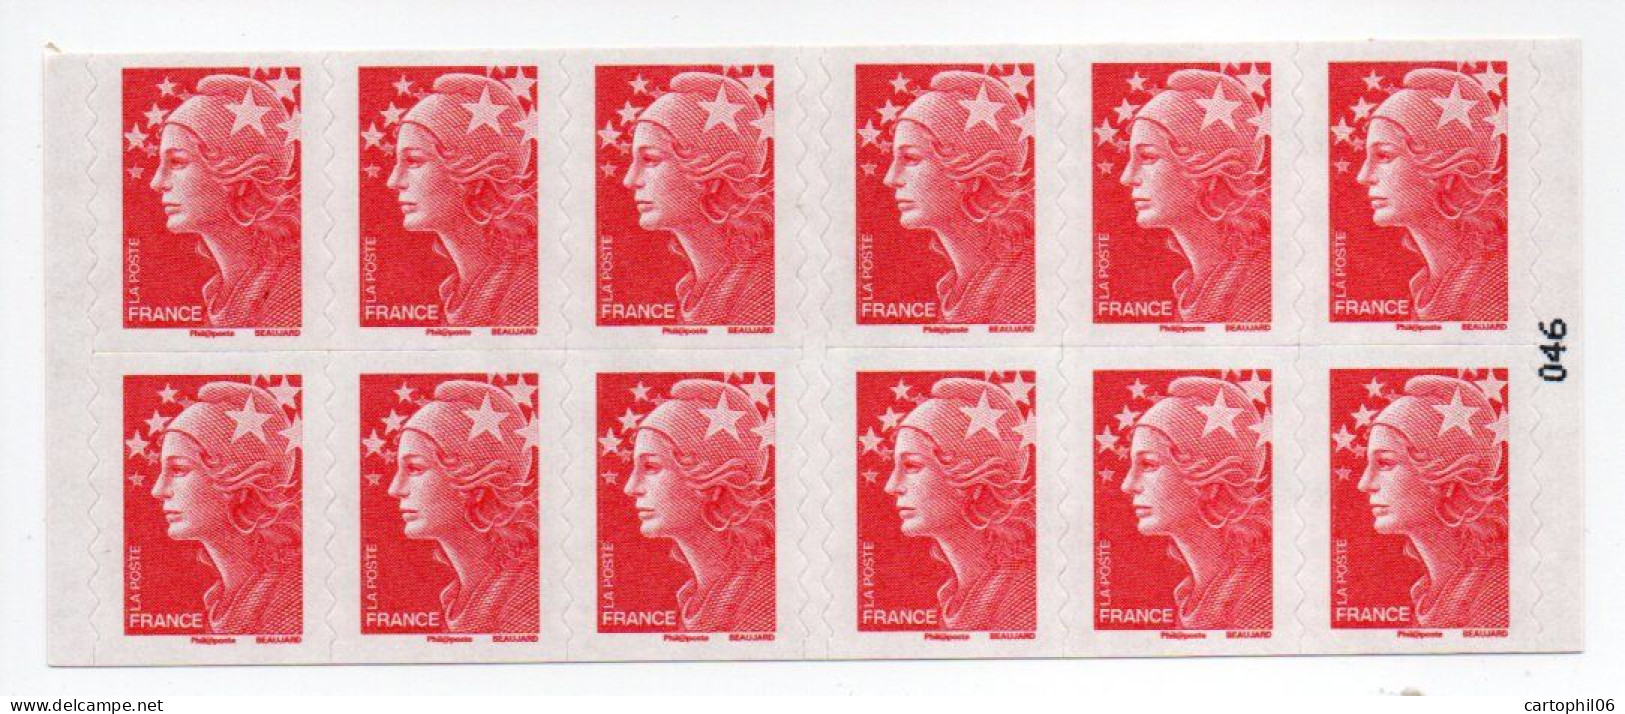 - FRANCE Carnet 12 Timbres Prioritaires Marianne De Beaujard - Les Carnets De Timbres Marianne - VALEUR FACIALE 17,16 € - Modern : 1959-…